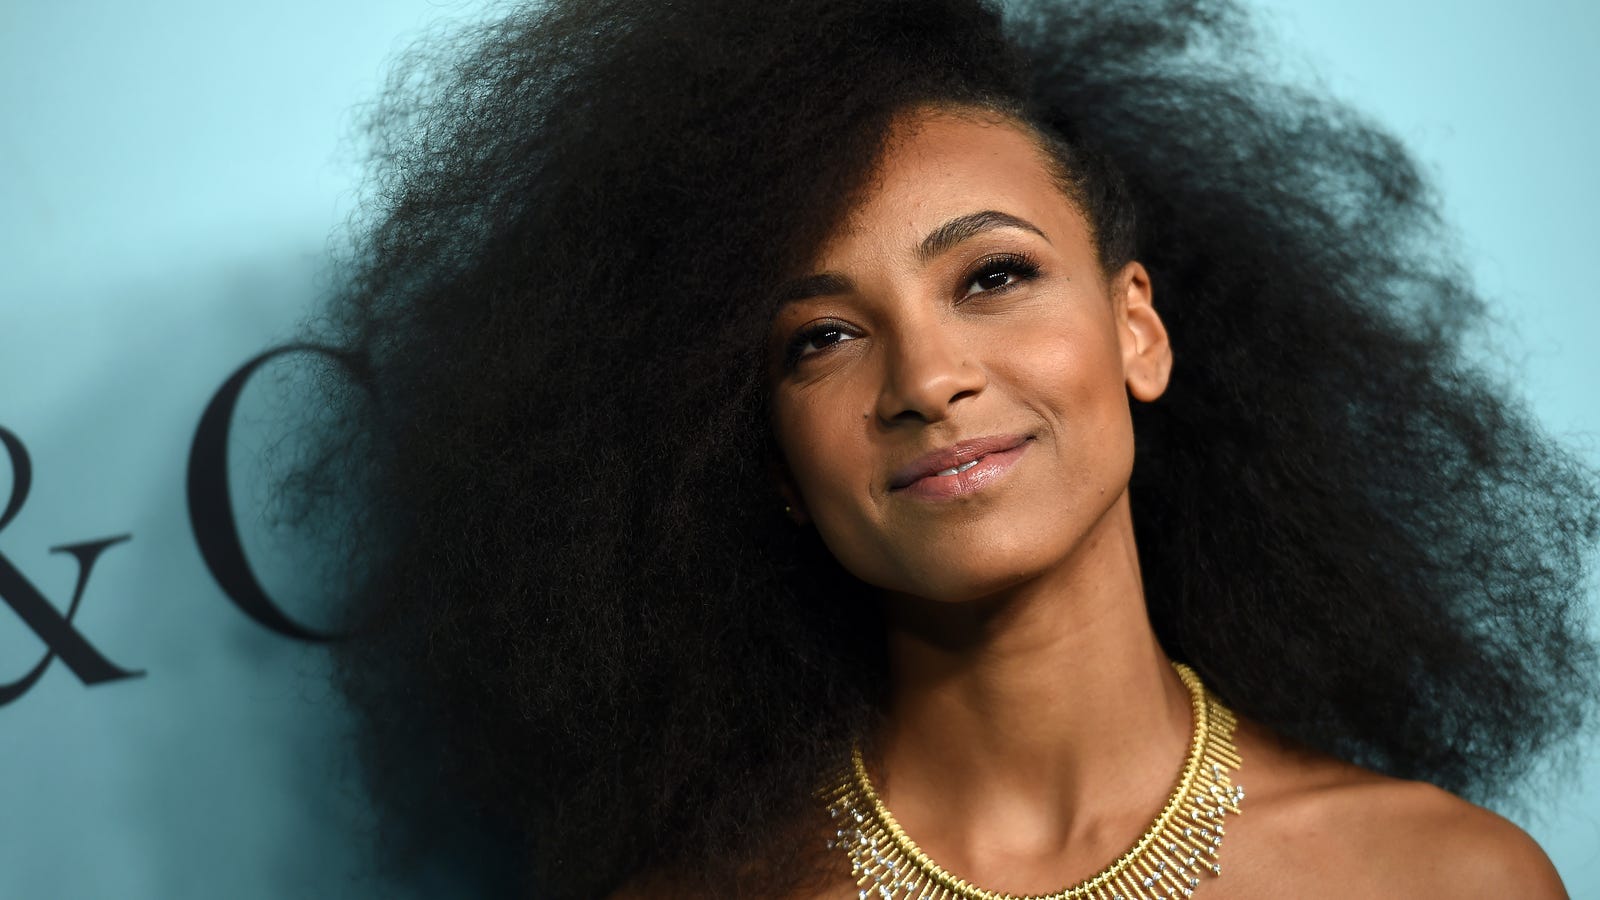 Esperanza Spalding on the Peace Ball, Trump and Life After Emily